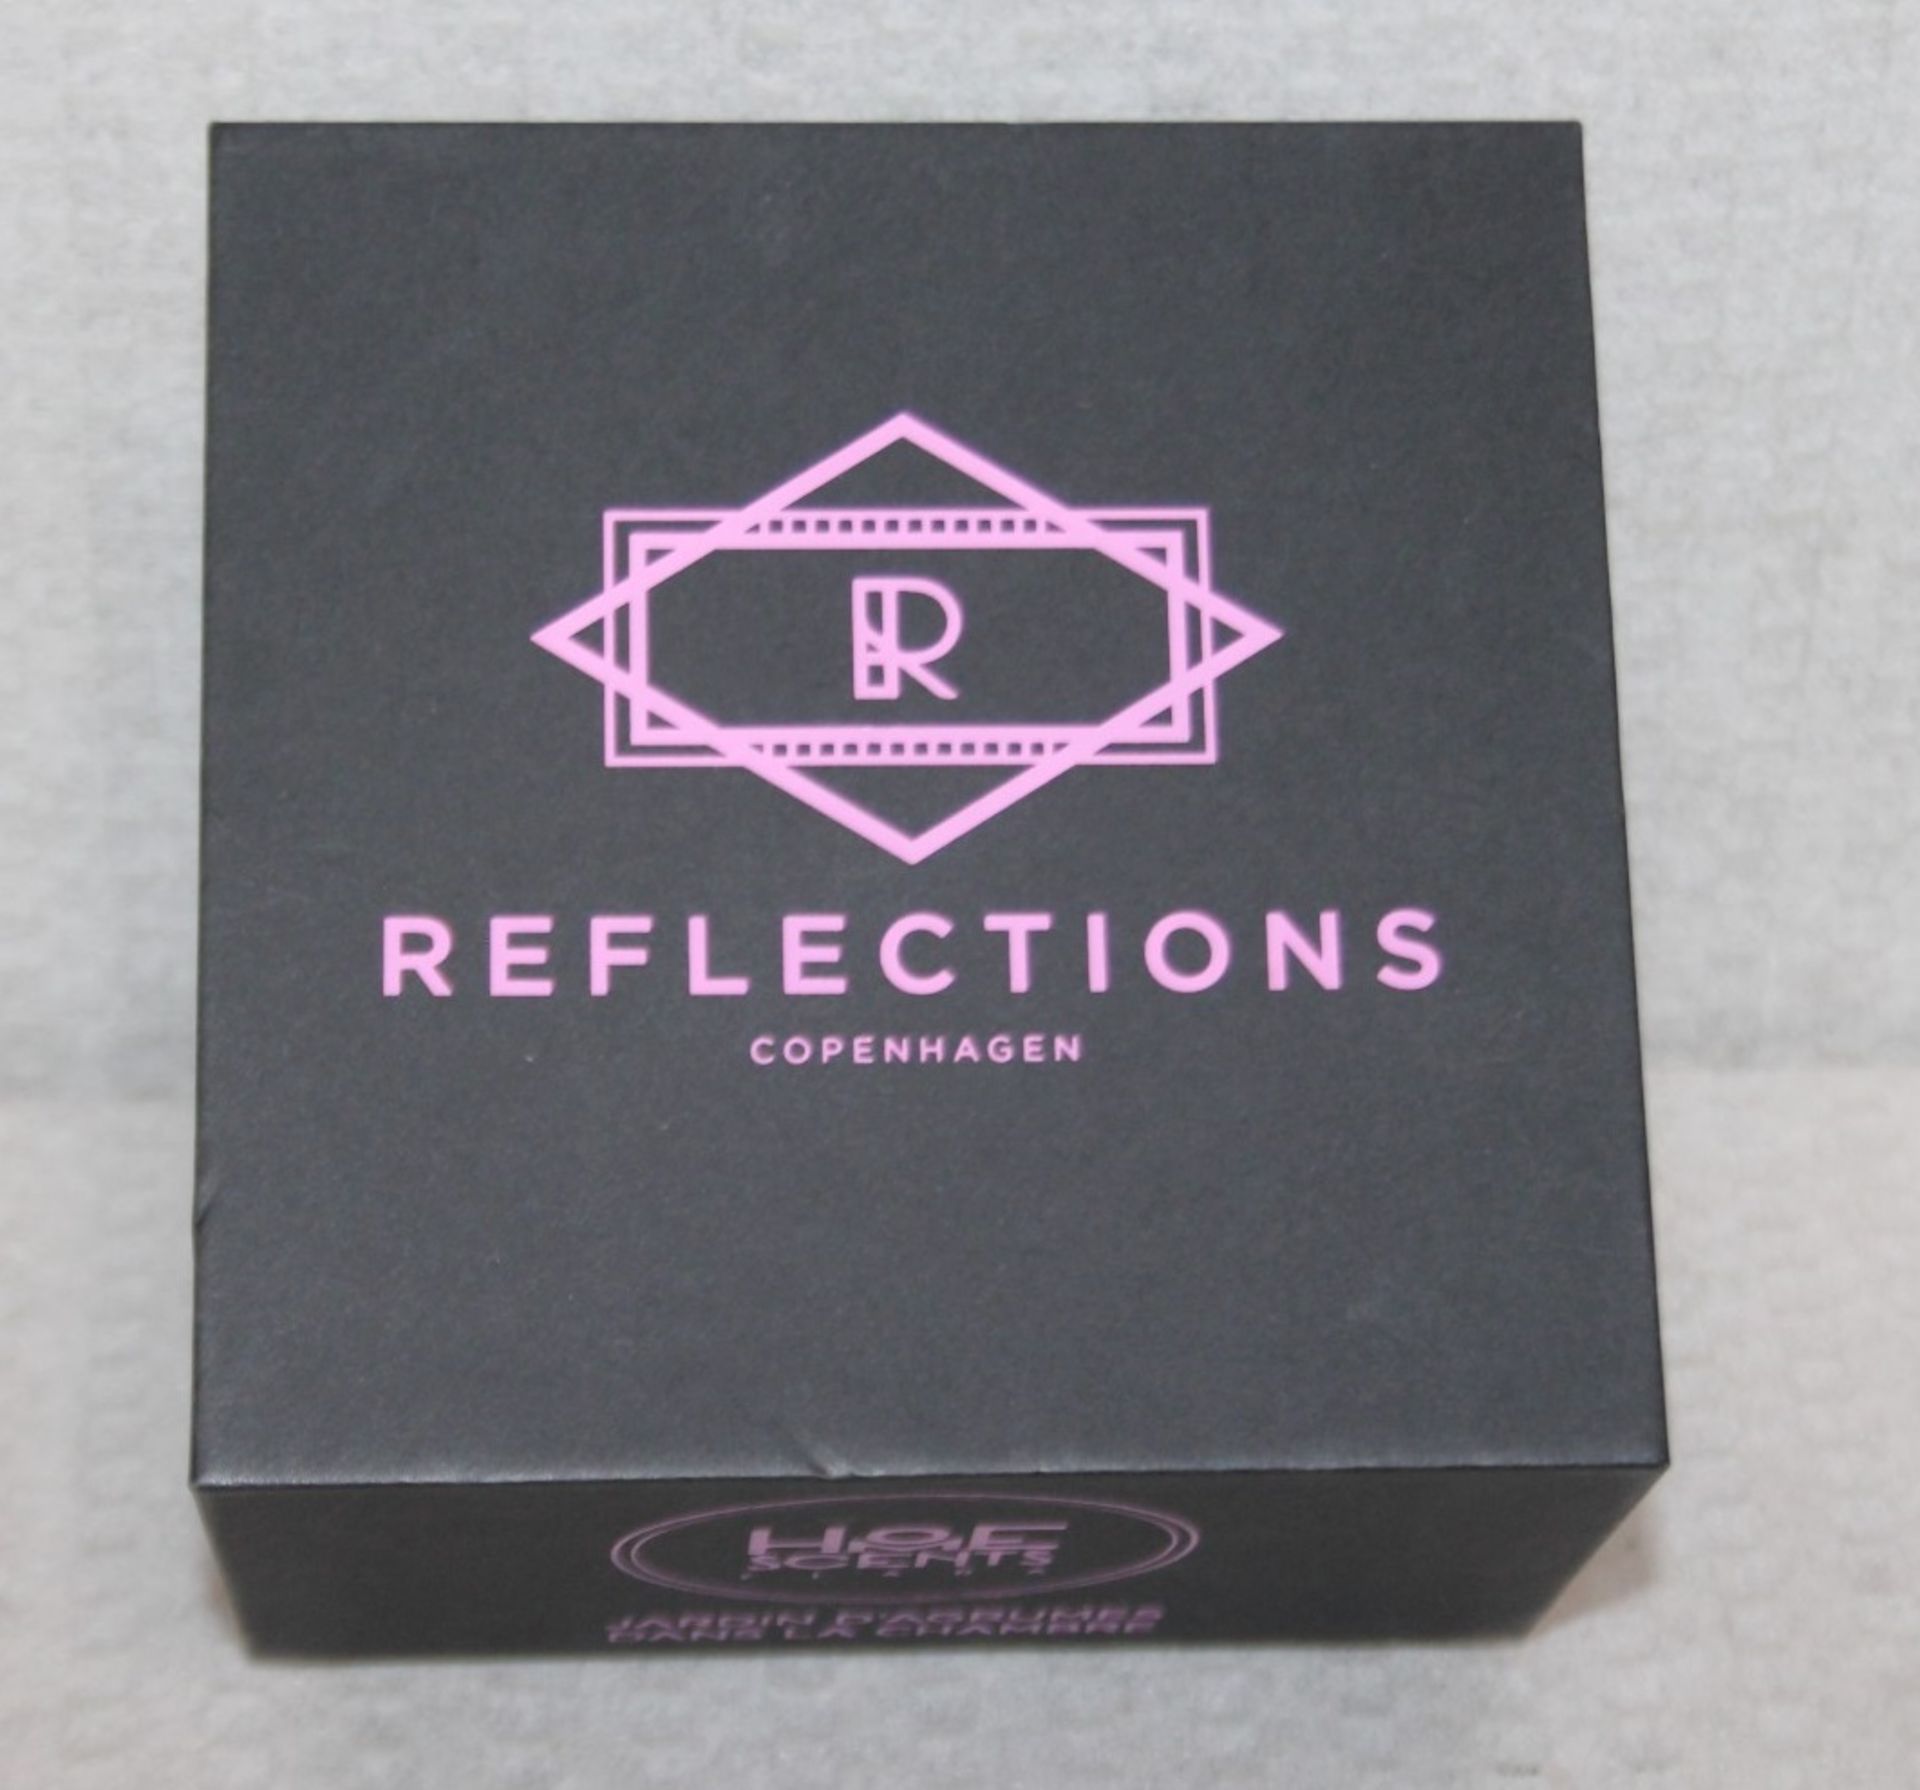 1 x REFLECTIONS COPENHAGEN 'Clara Jardin d'Agrumes' Luxury Scented Pink Crystal Candle - RRP £279.20 - Image 6 of 9